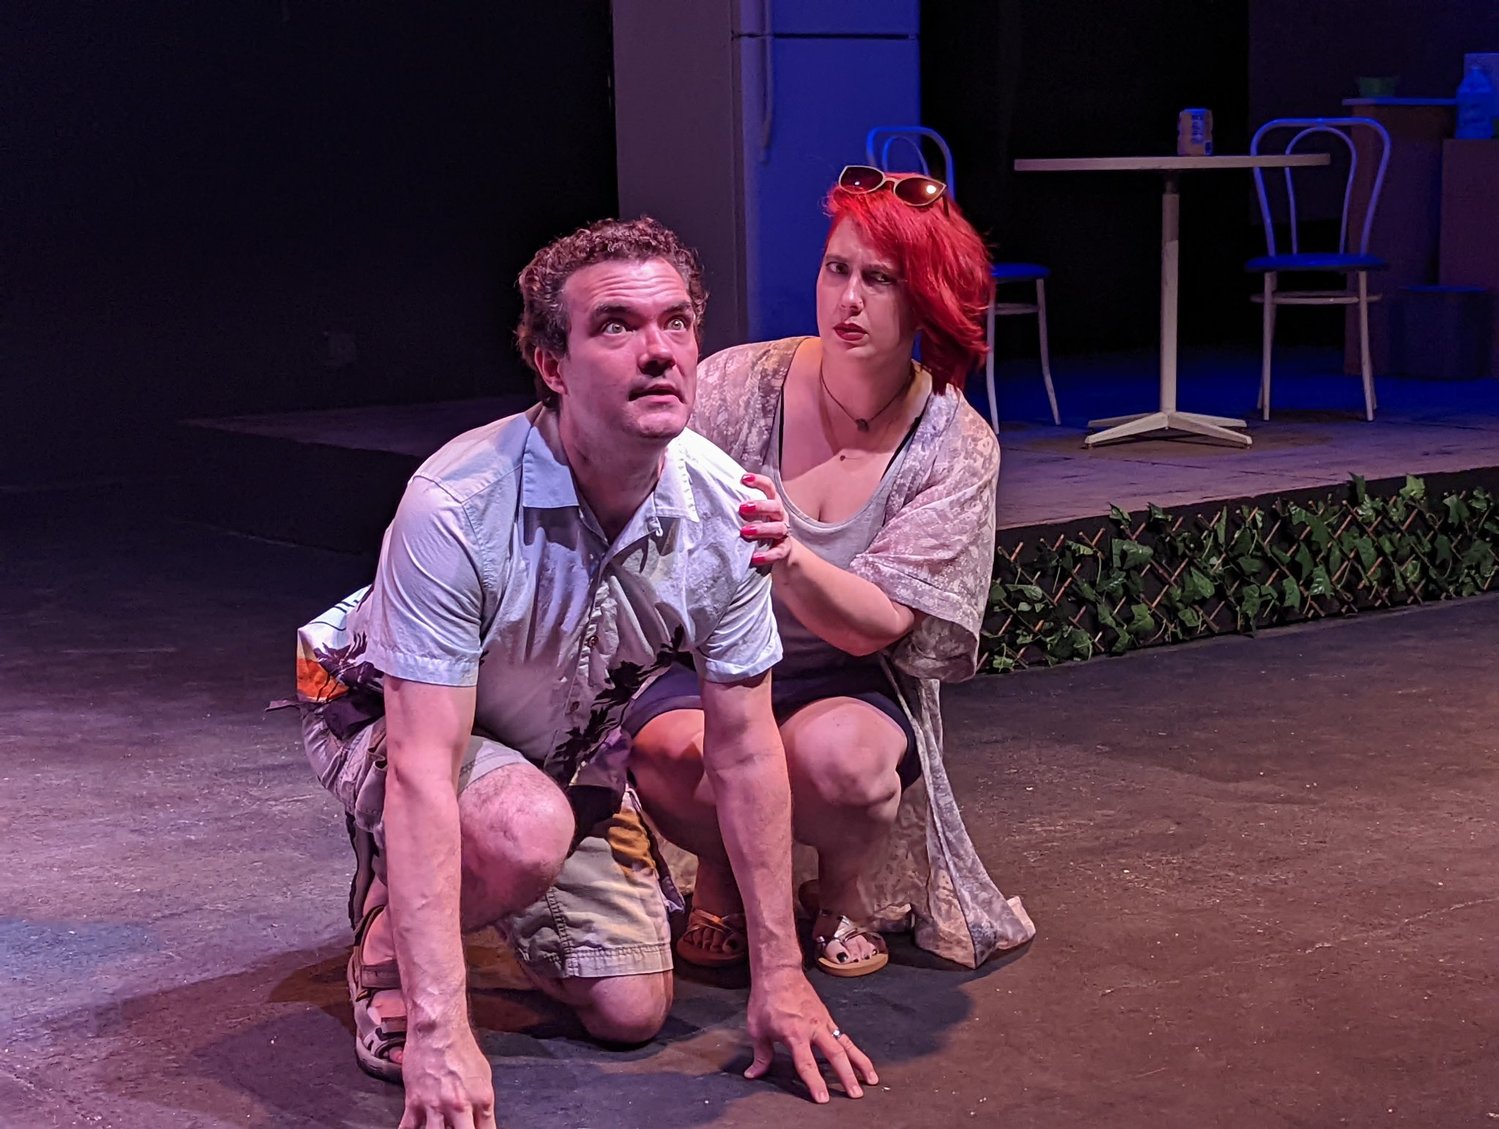 Joseph Dickson and Rachel Mender perform as Pony and John Jones in Over the Ledges' production of "The Realistic Joneses."